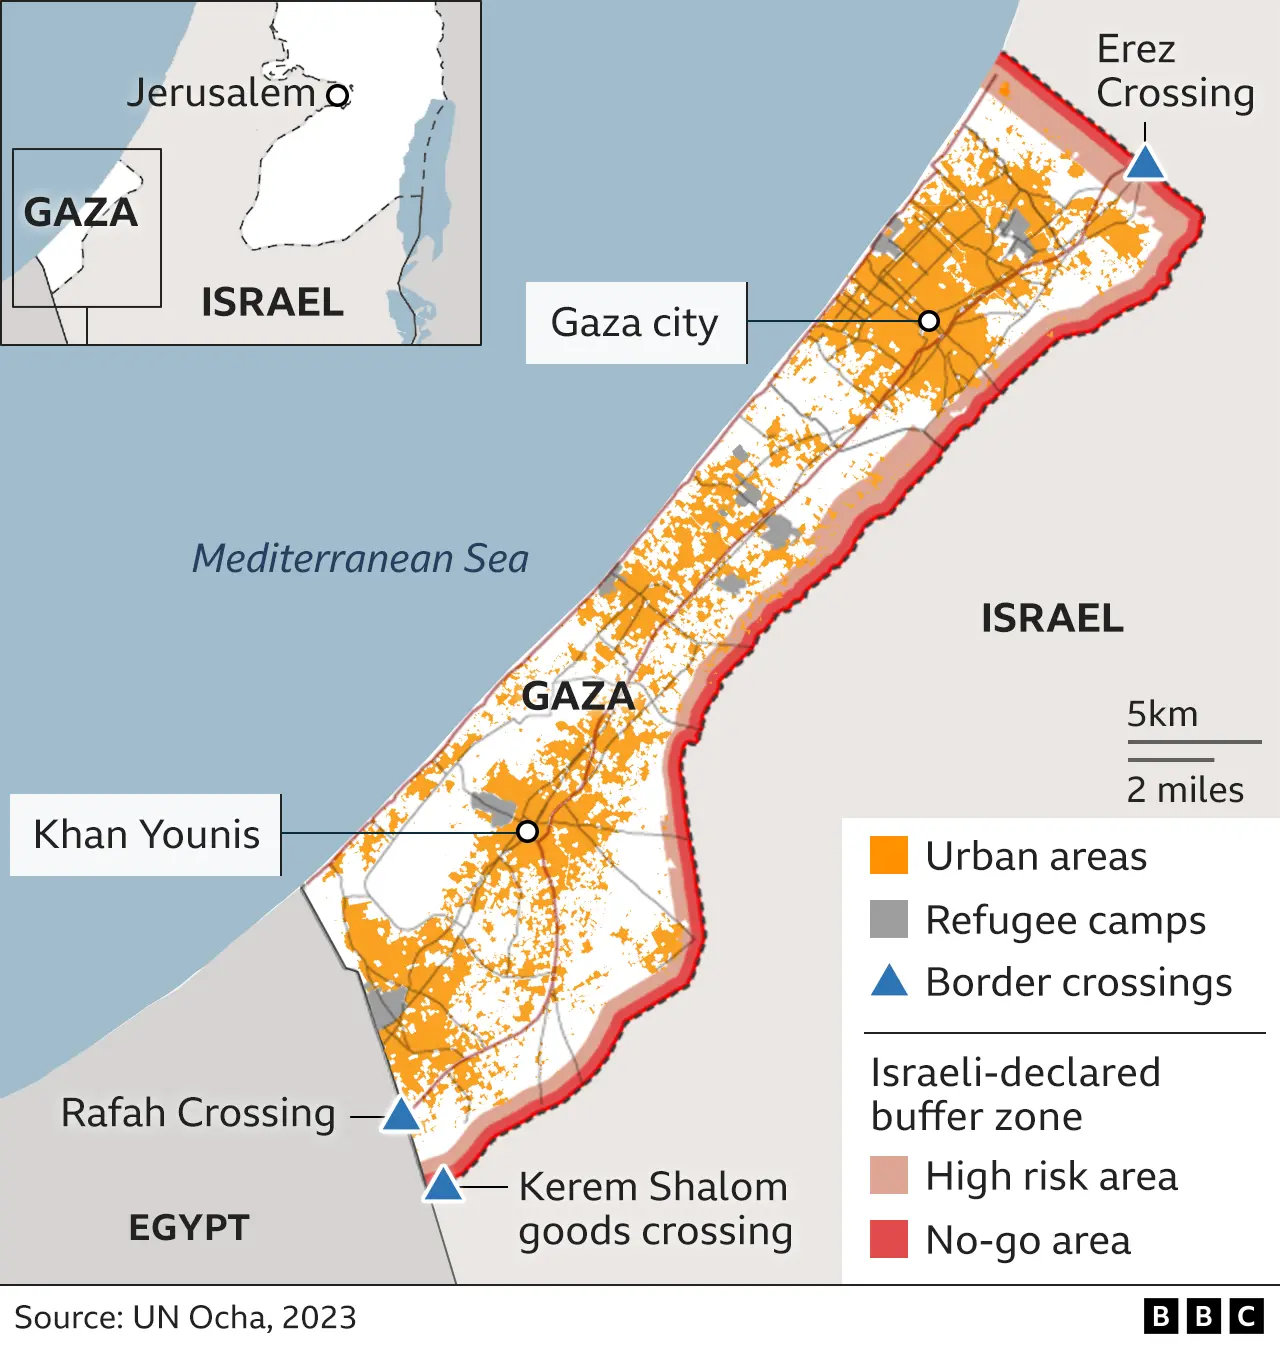 Map of the Gaza Strip, urban areas, refugee camps and border crossings